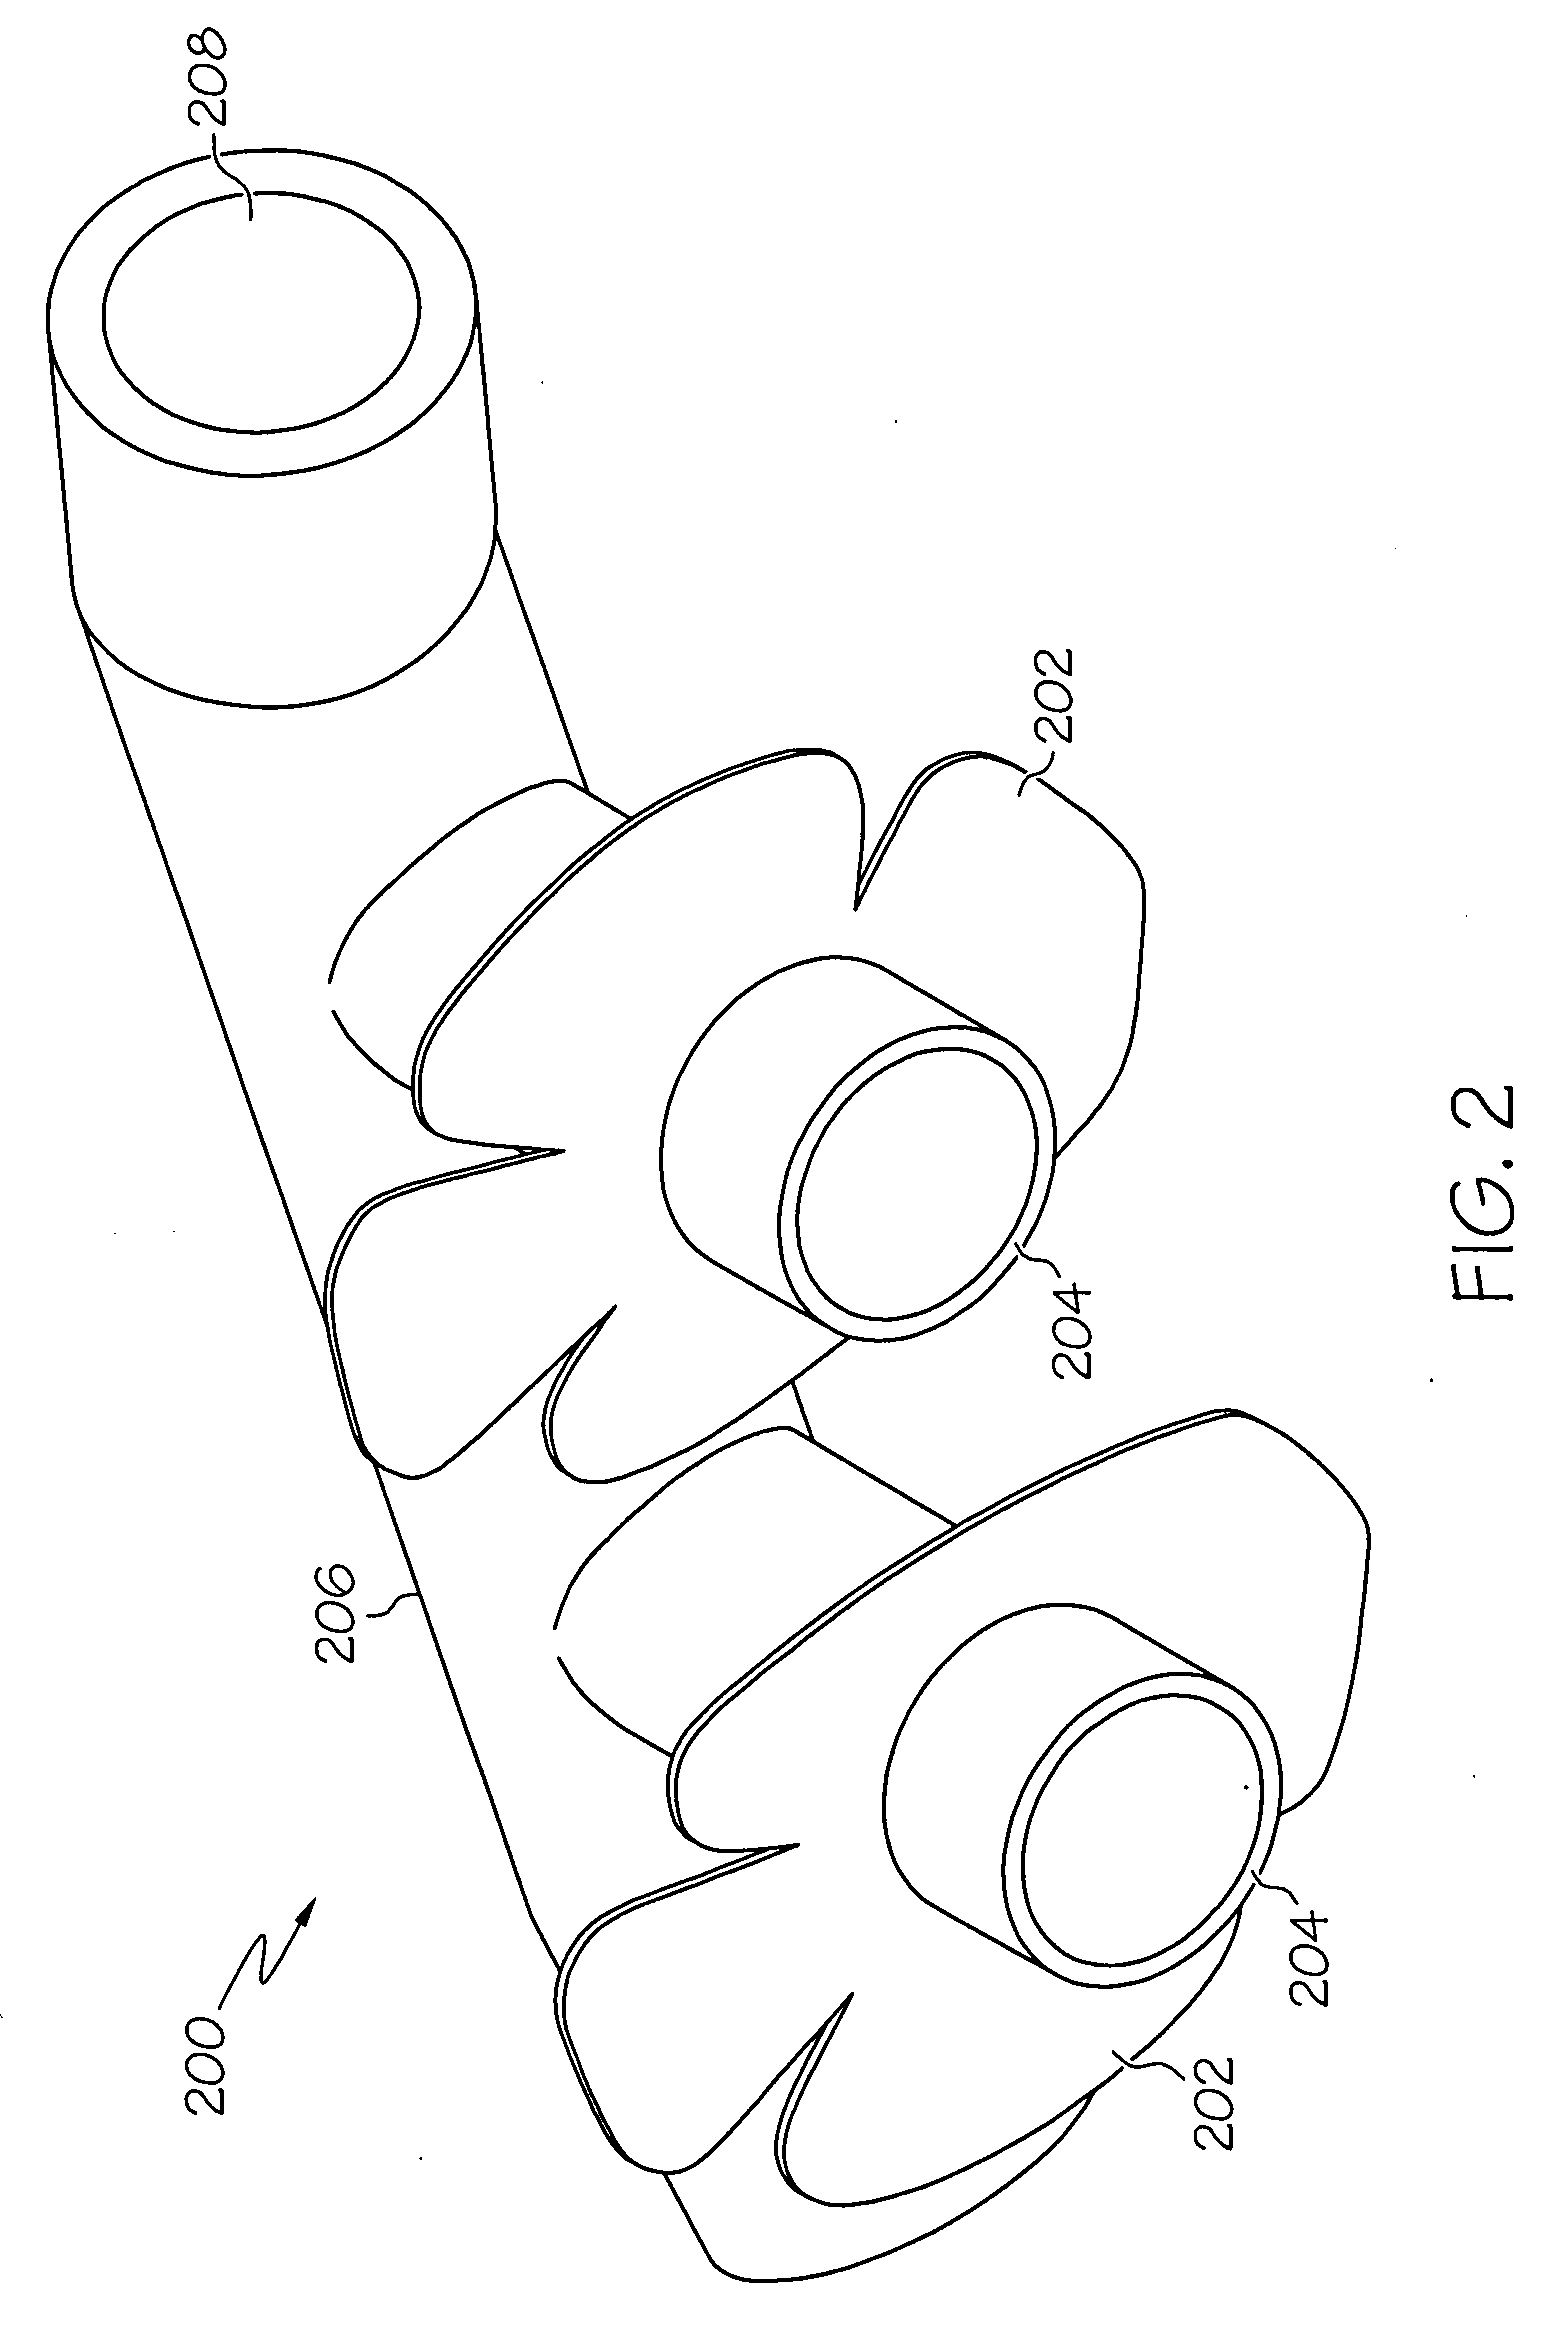 High Flow Therapy Artificial Airway Interfaces and Related Methods